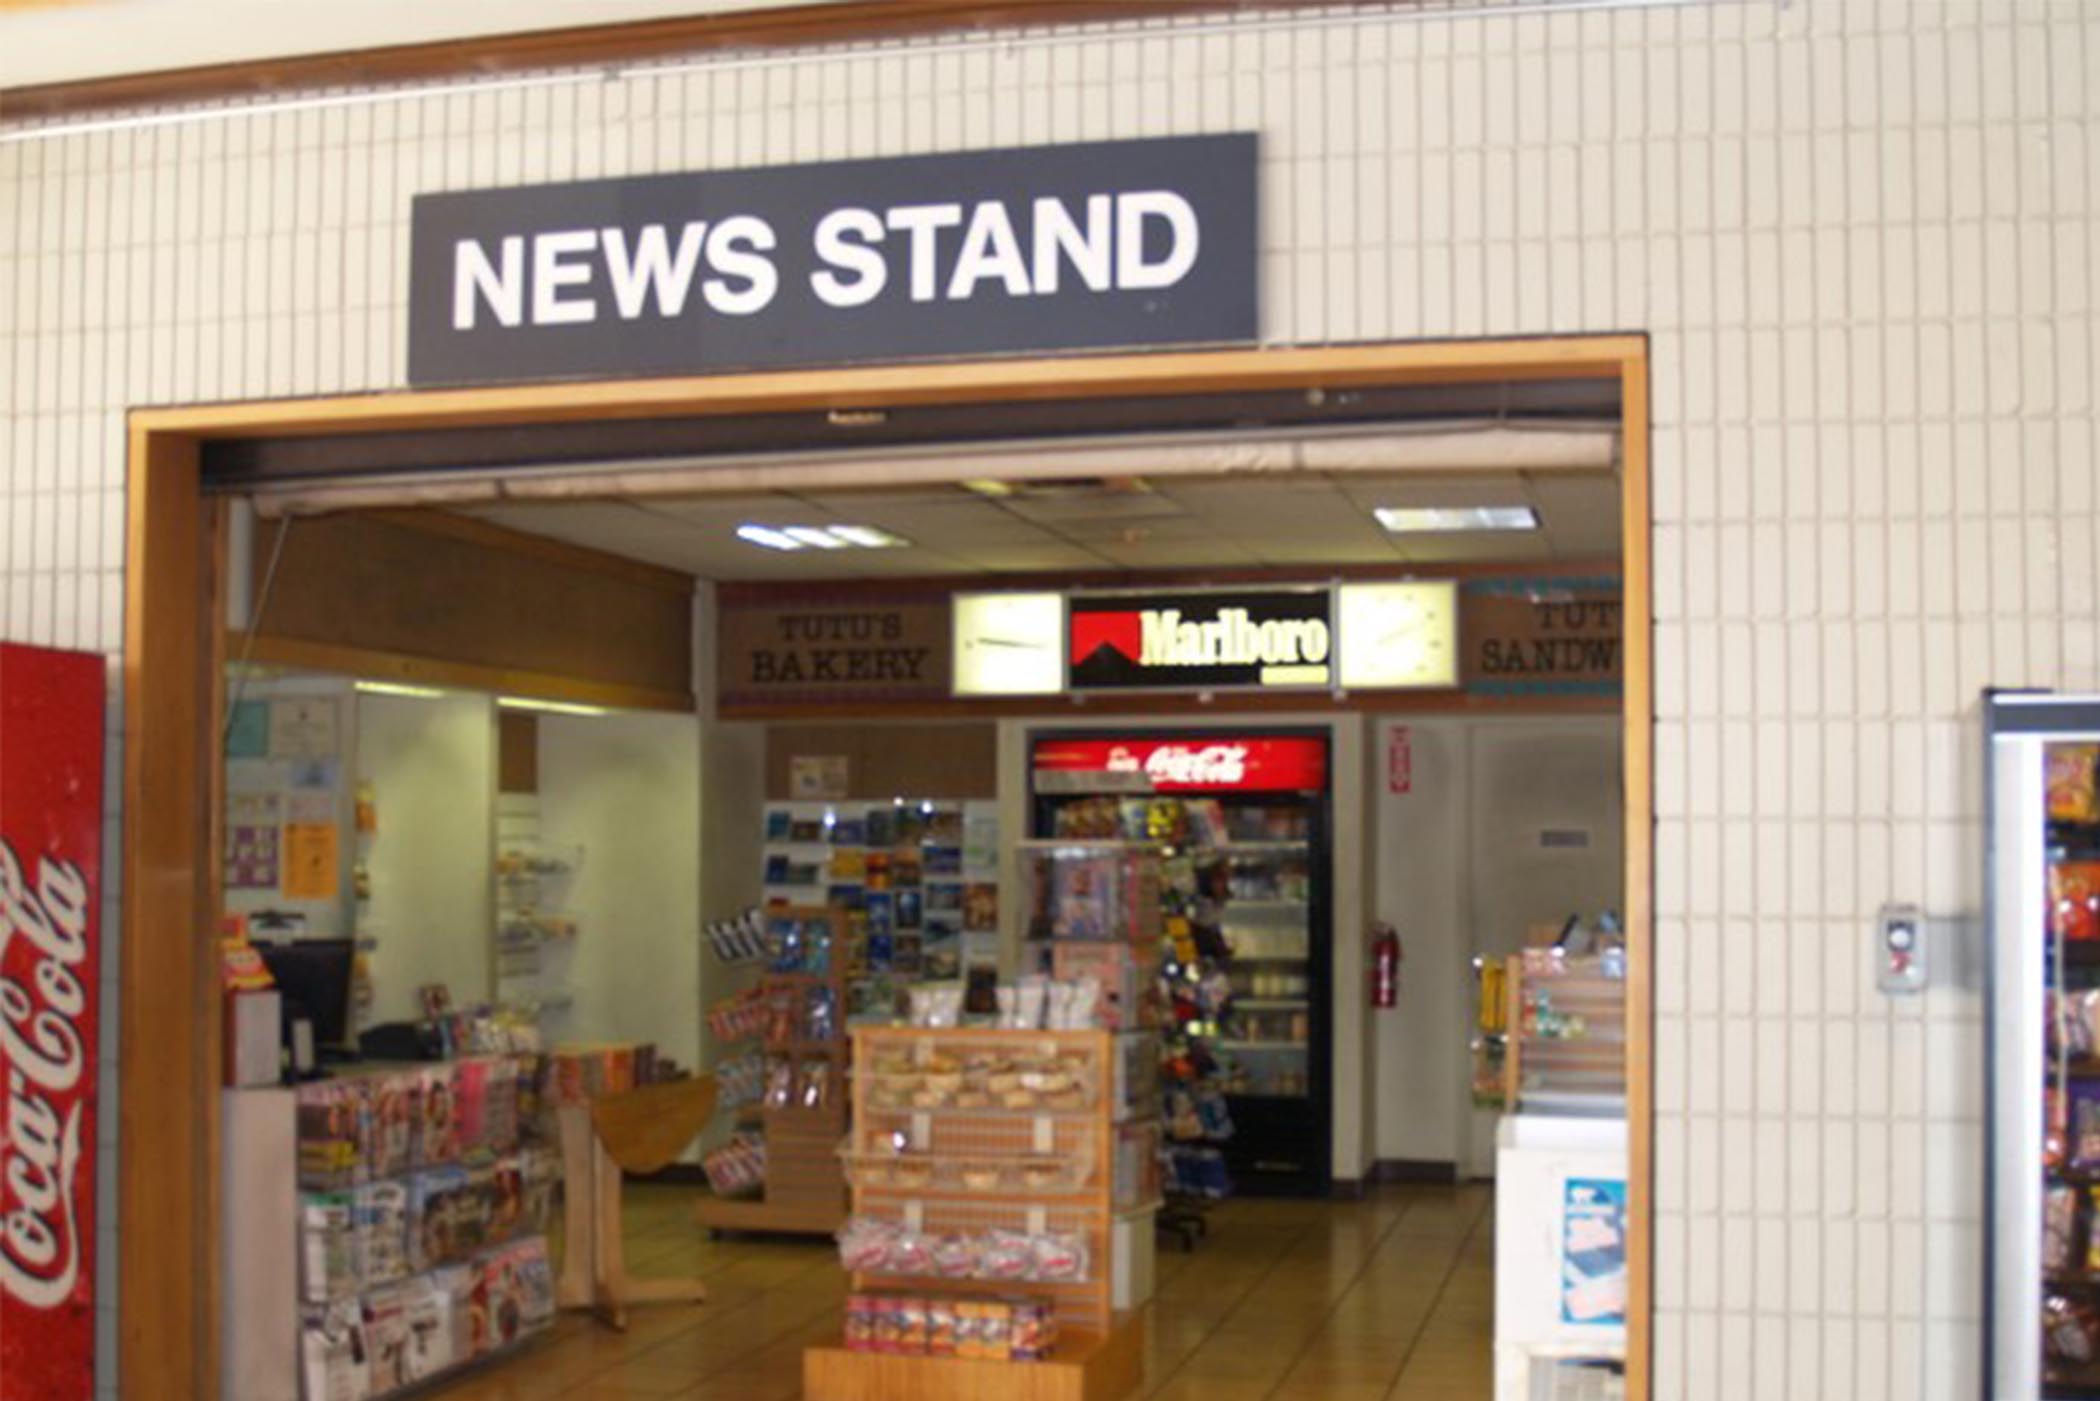 Newsstand Newspapers, magazines, books, calendars, post cards, candy, snacks, cold drinks.